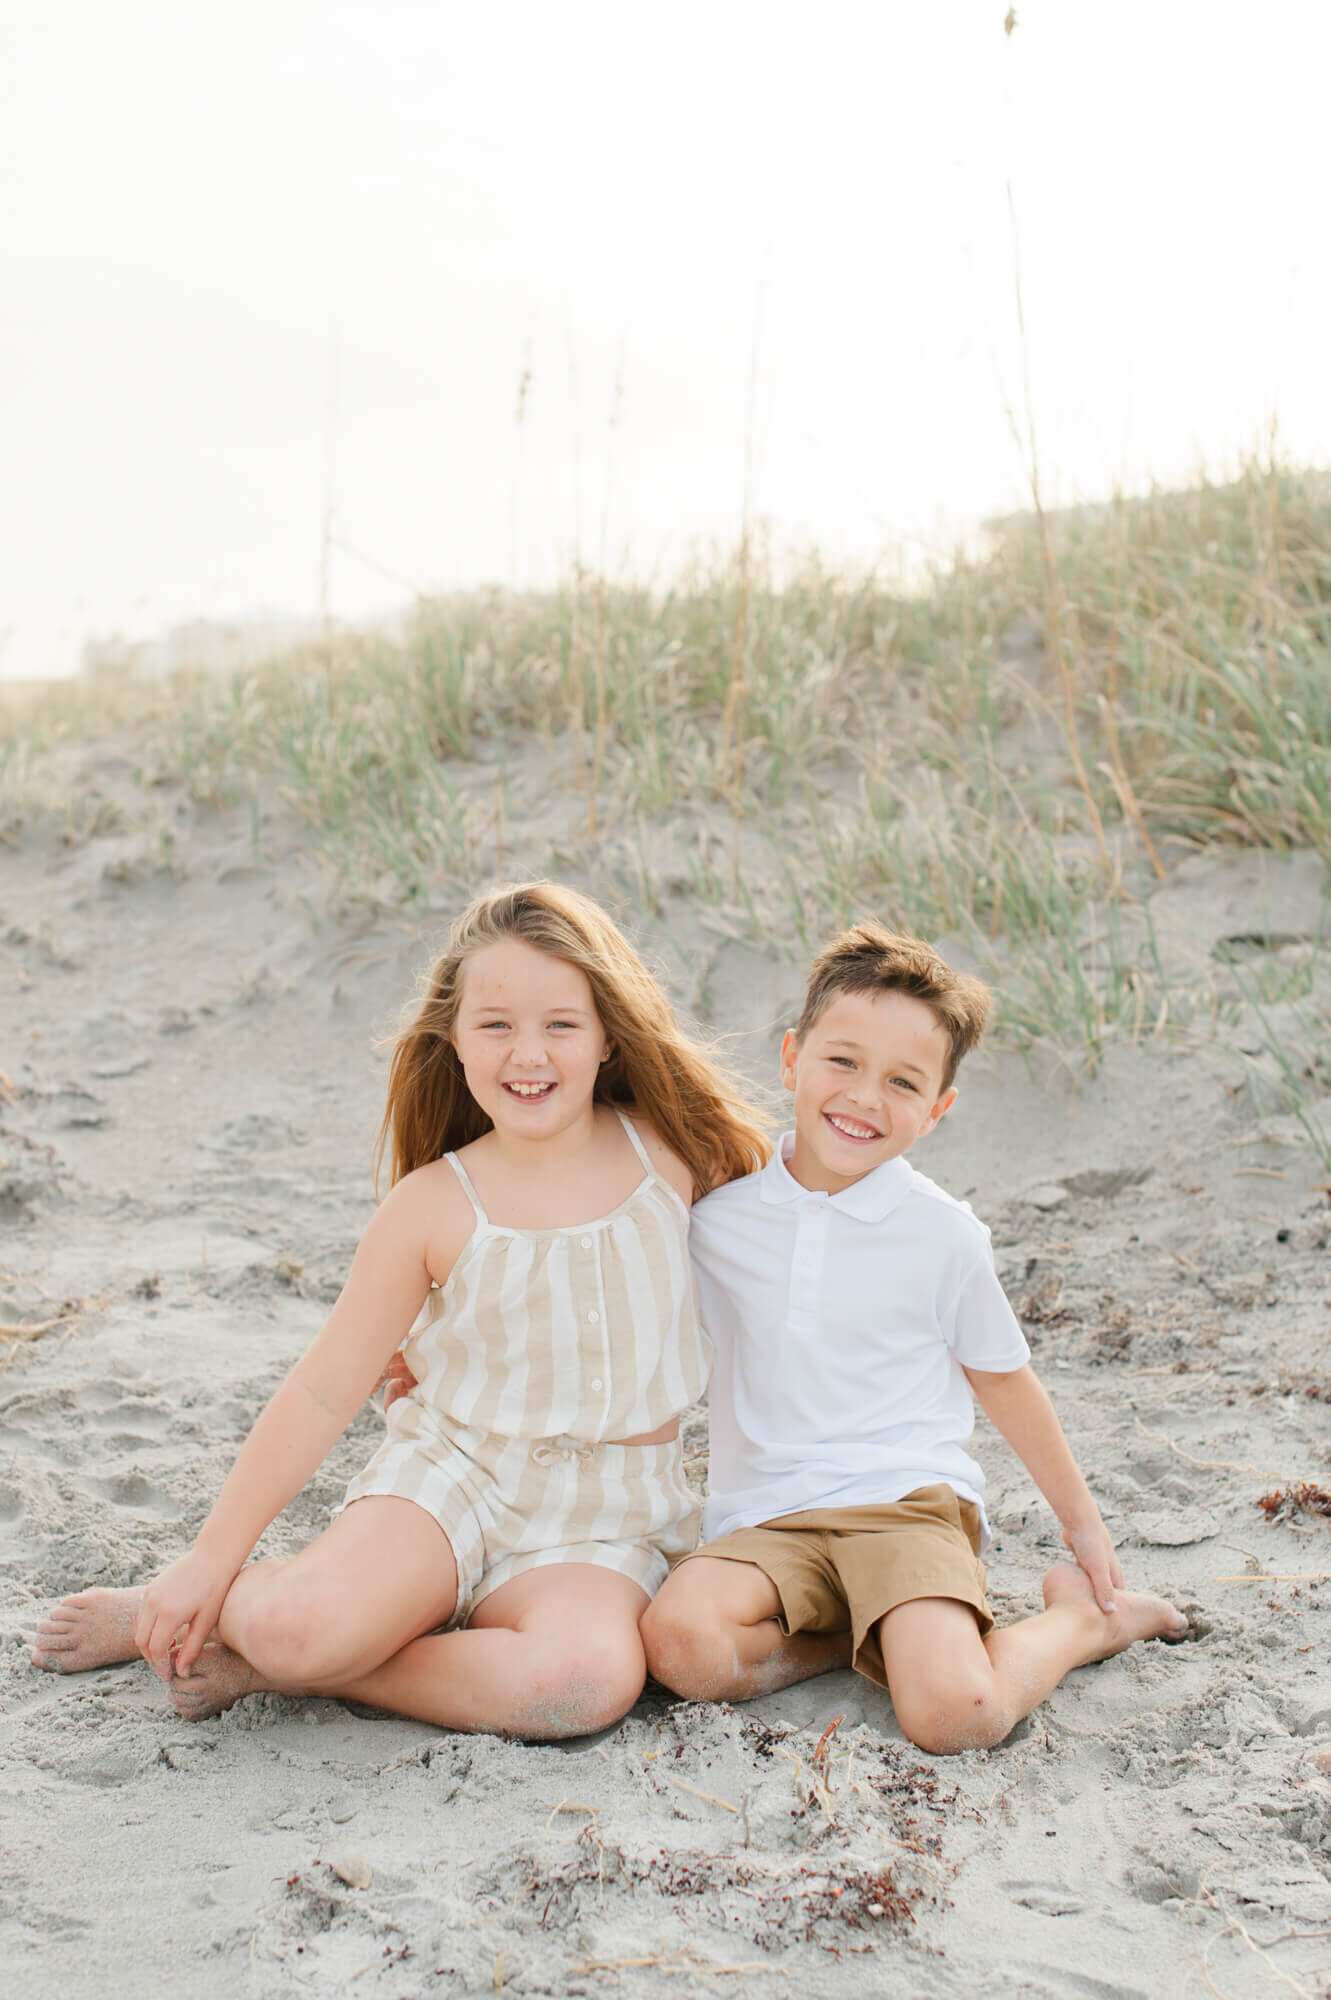 Brother and sister sitting in the dunes smiling at the camera during golden hour